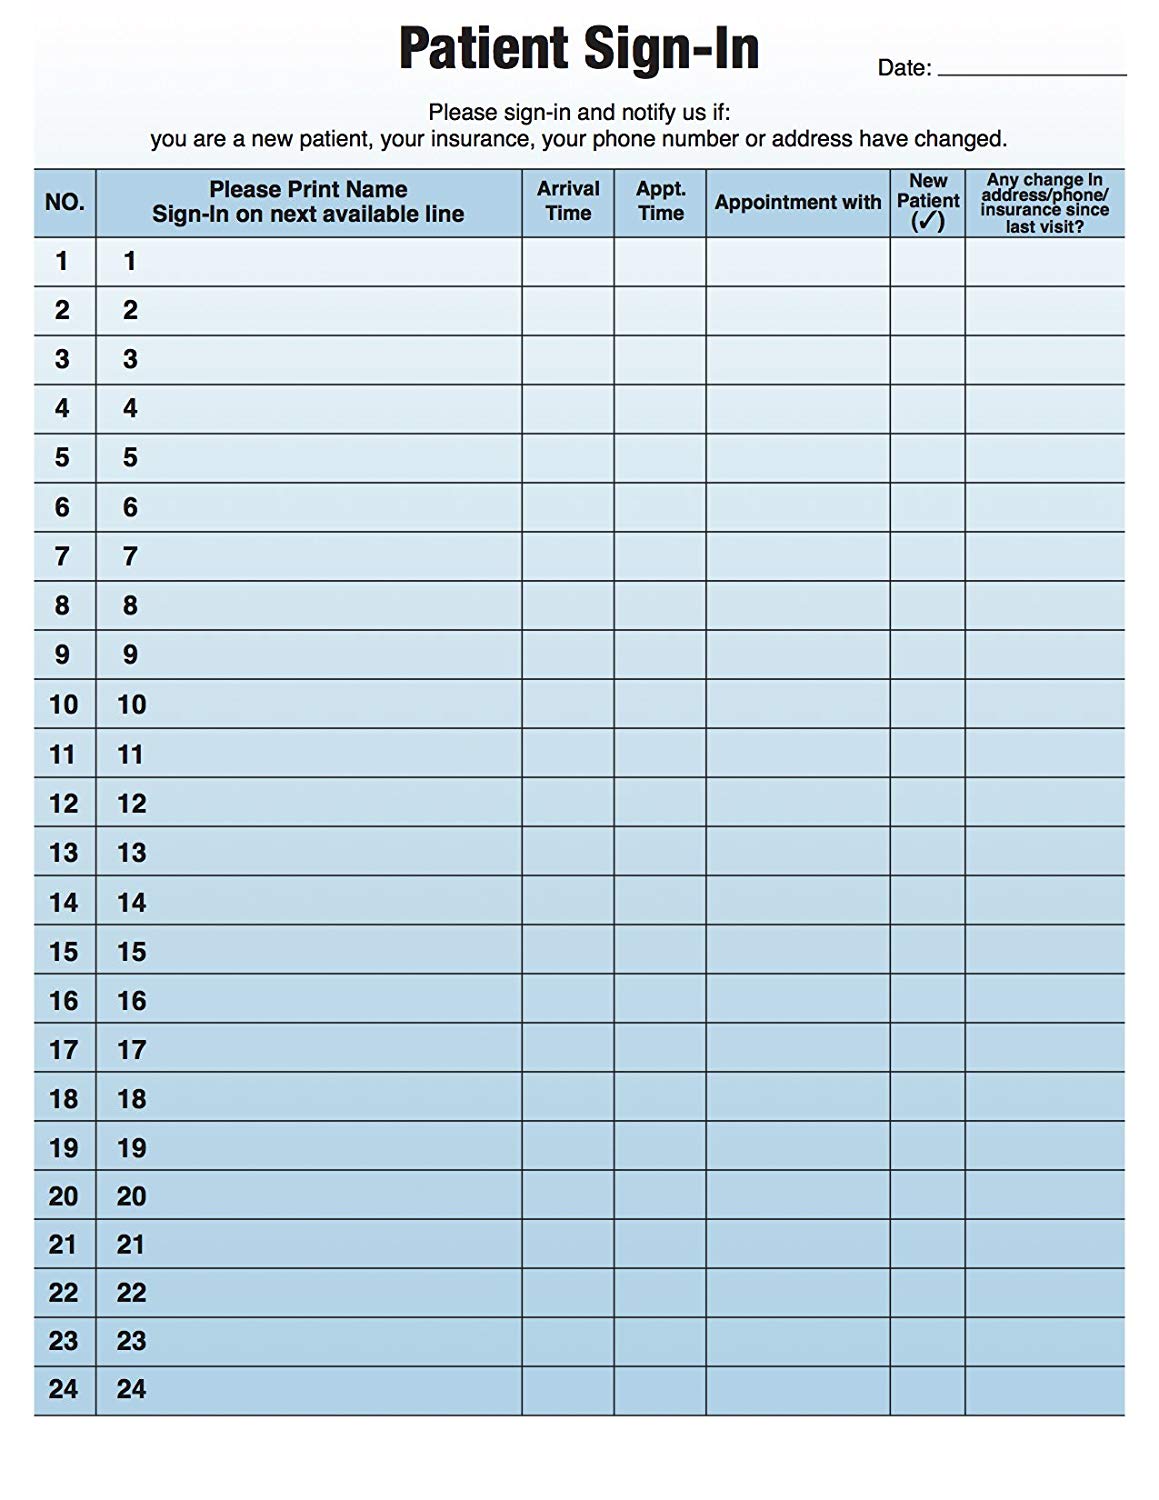 Protect Your Patients' Privacy with HIPAA Compliant Sign in Sheets